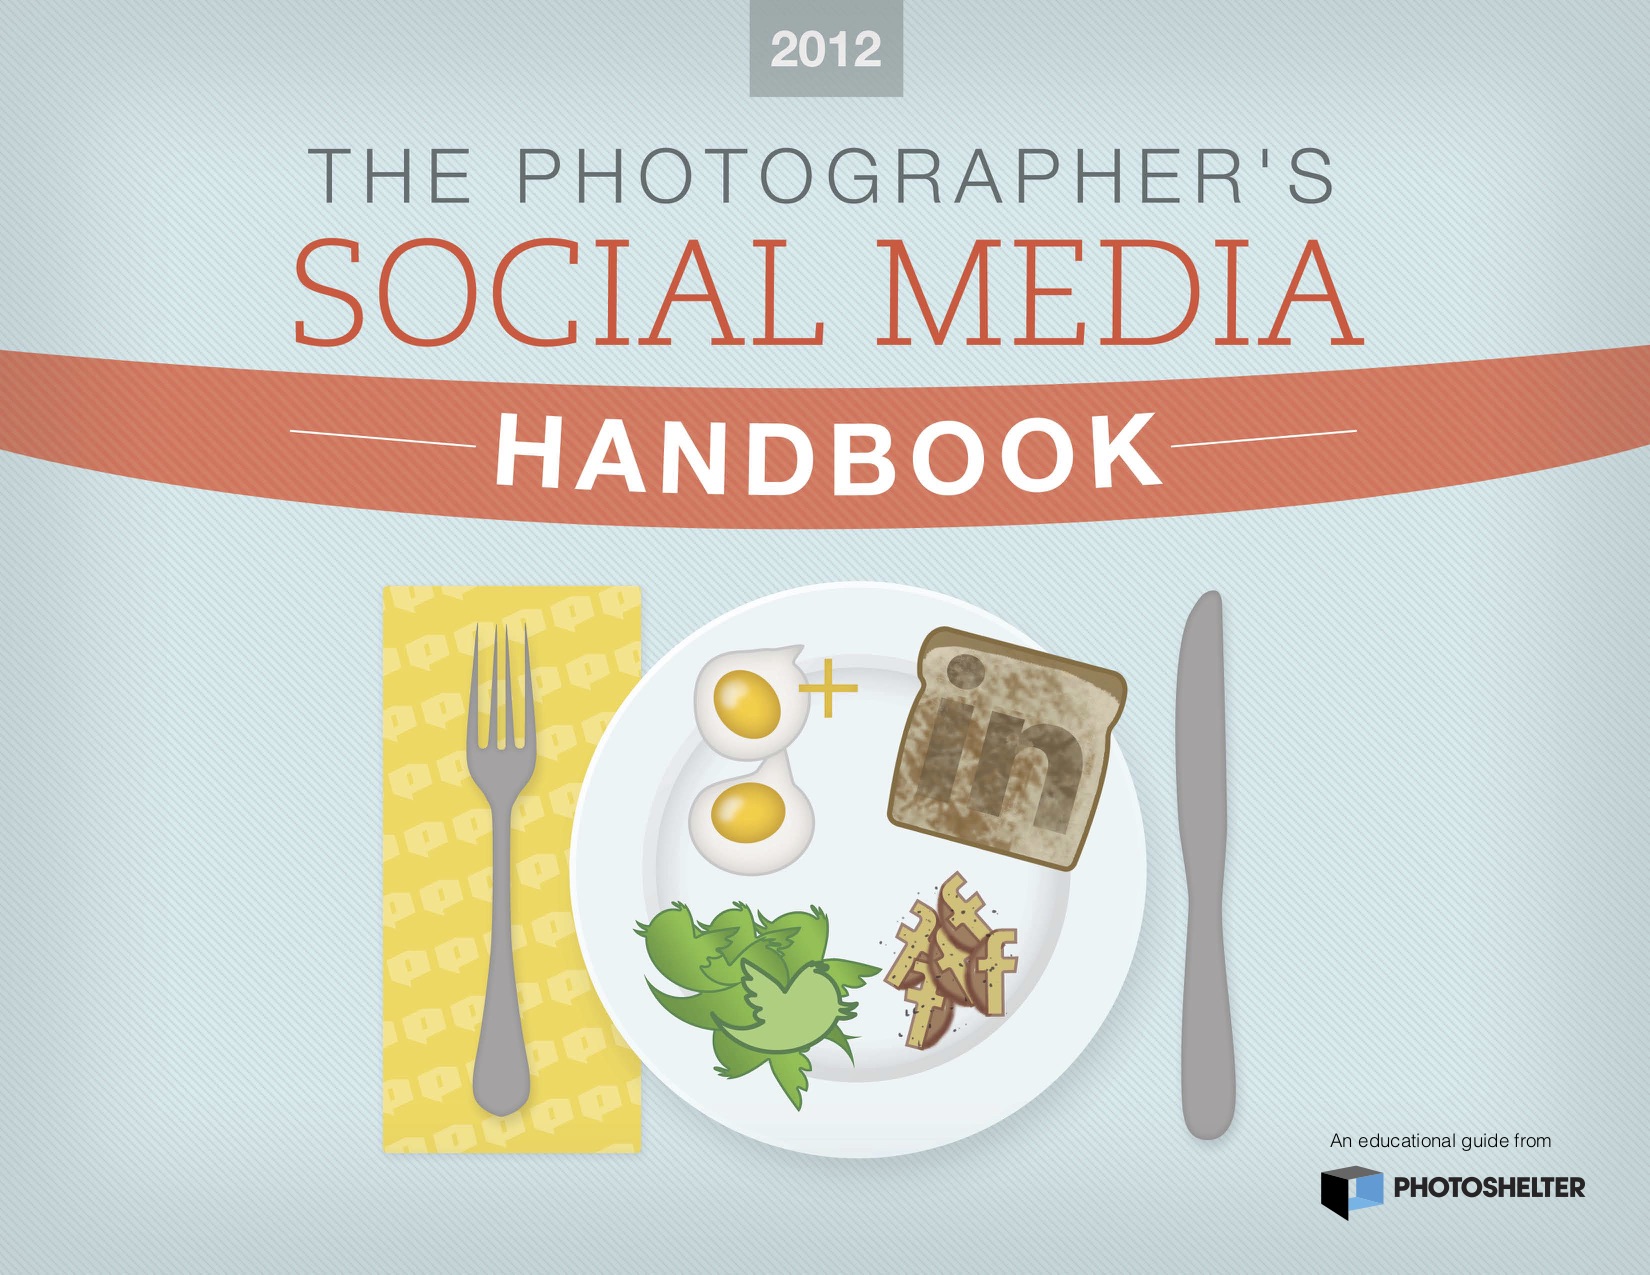 The top reads The Photographer's Social Media Handbook. Below the text is a dinning table setting, with a napkin, knife, fork and plate. On the plate are: an egg shaped like the Google+ logo, a slice of toast with the LinkedIn logo burned in the top, a salad with the greens shaped like the Twitter logo, and potatoes in the shape of the Facebook logo.